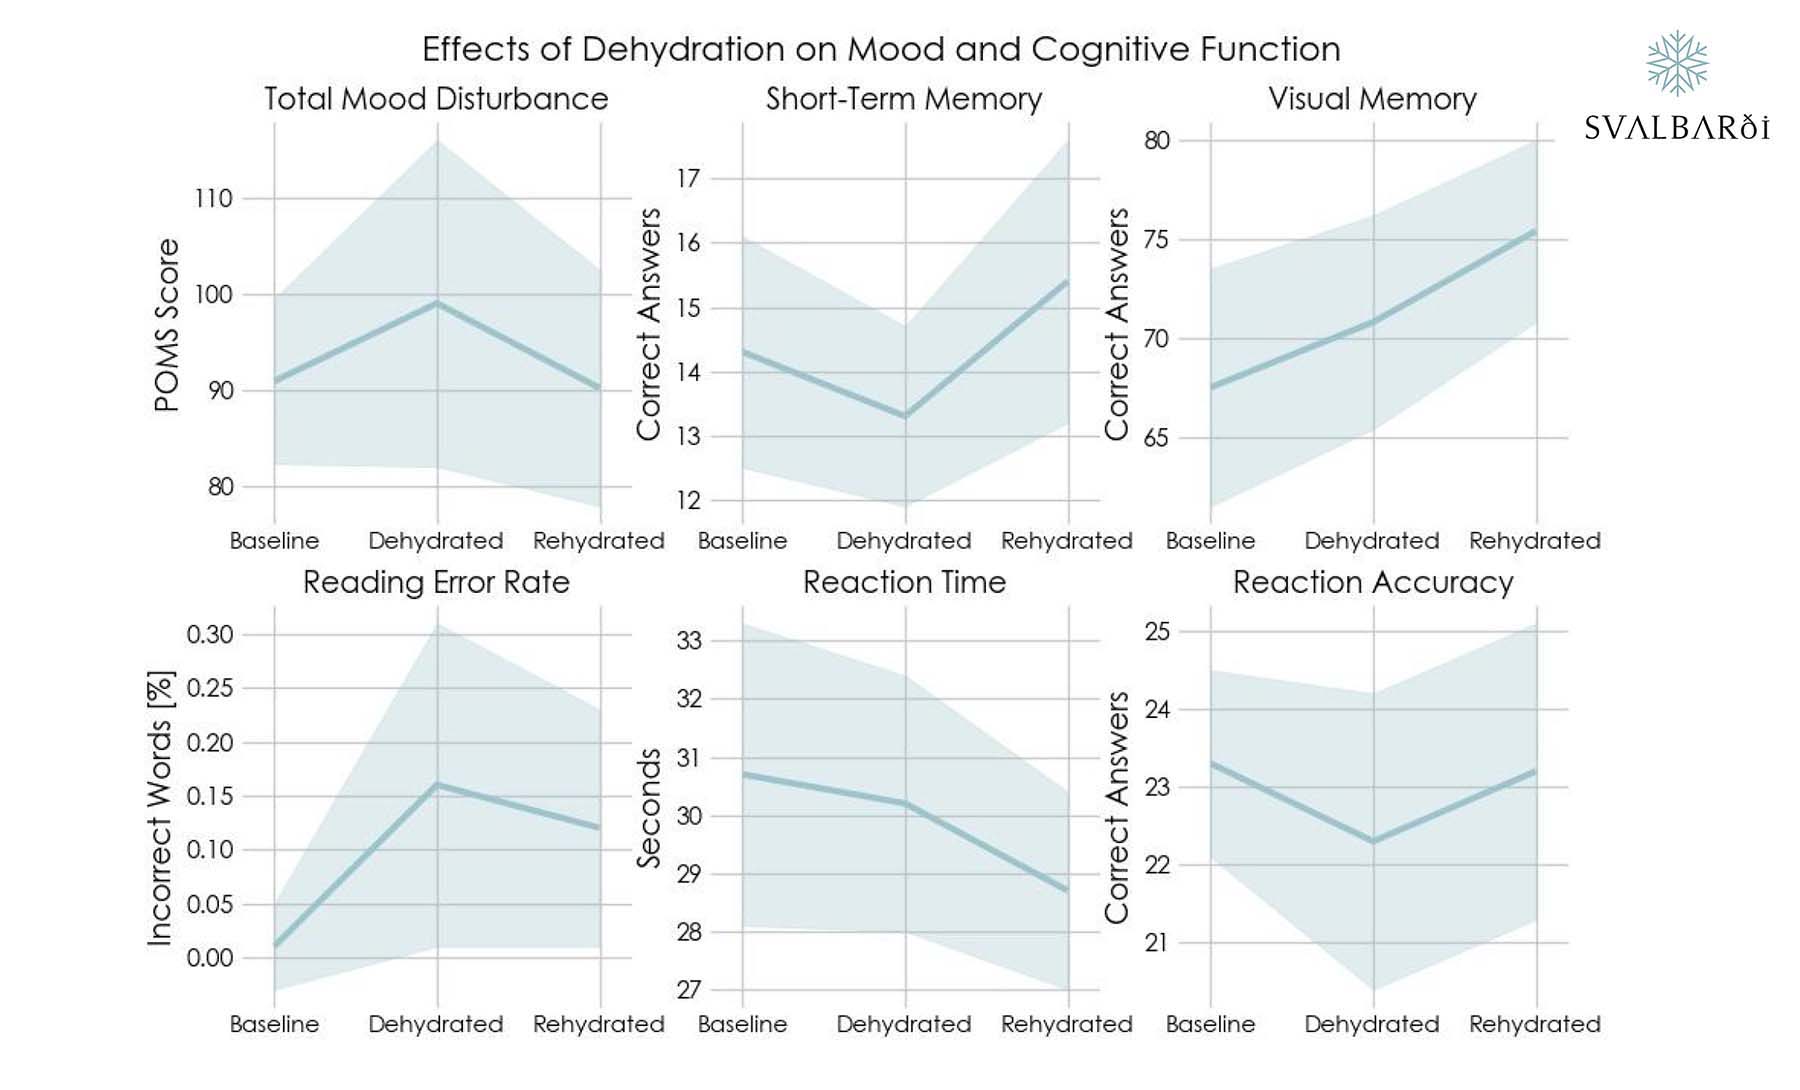 Effect of Dehydration on Mood and Cognitive Function